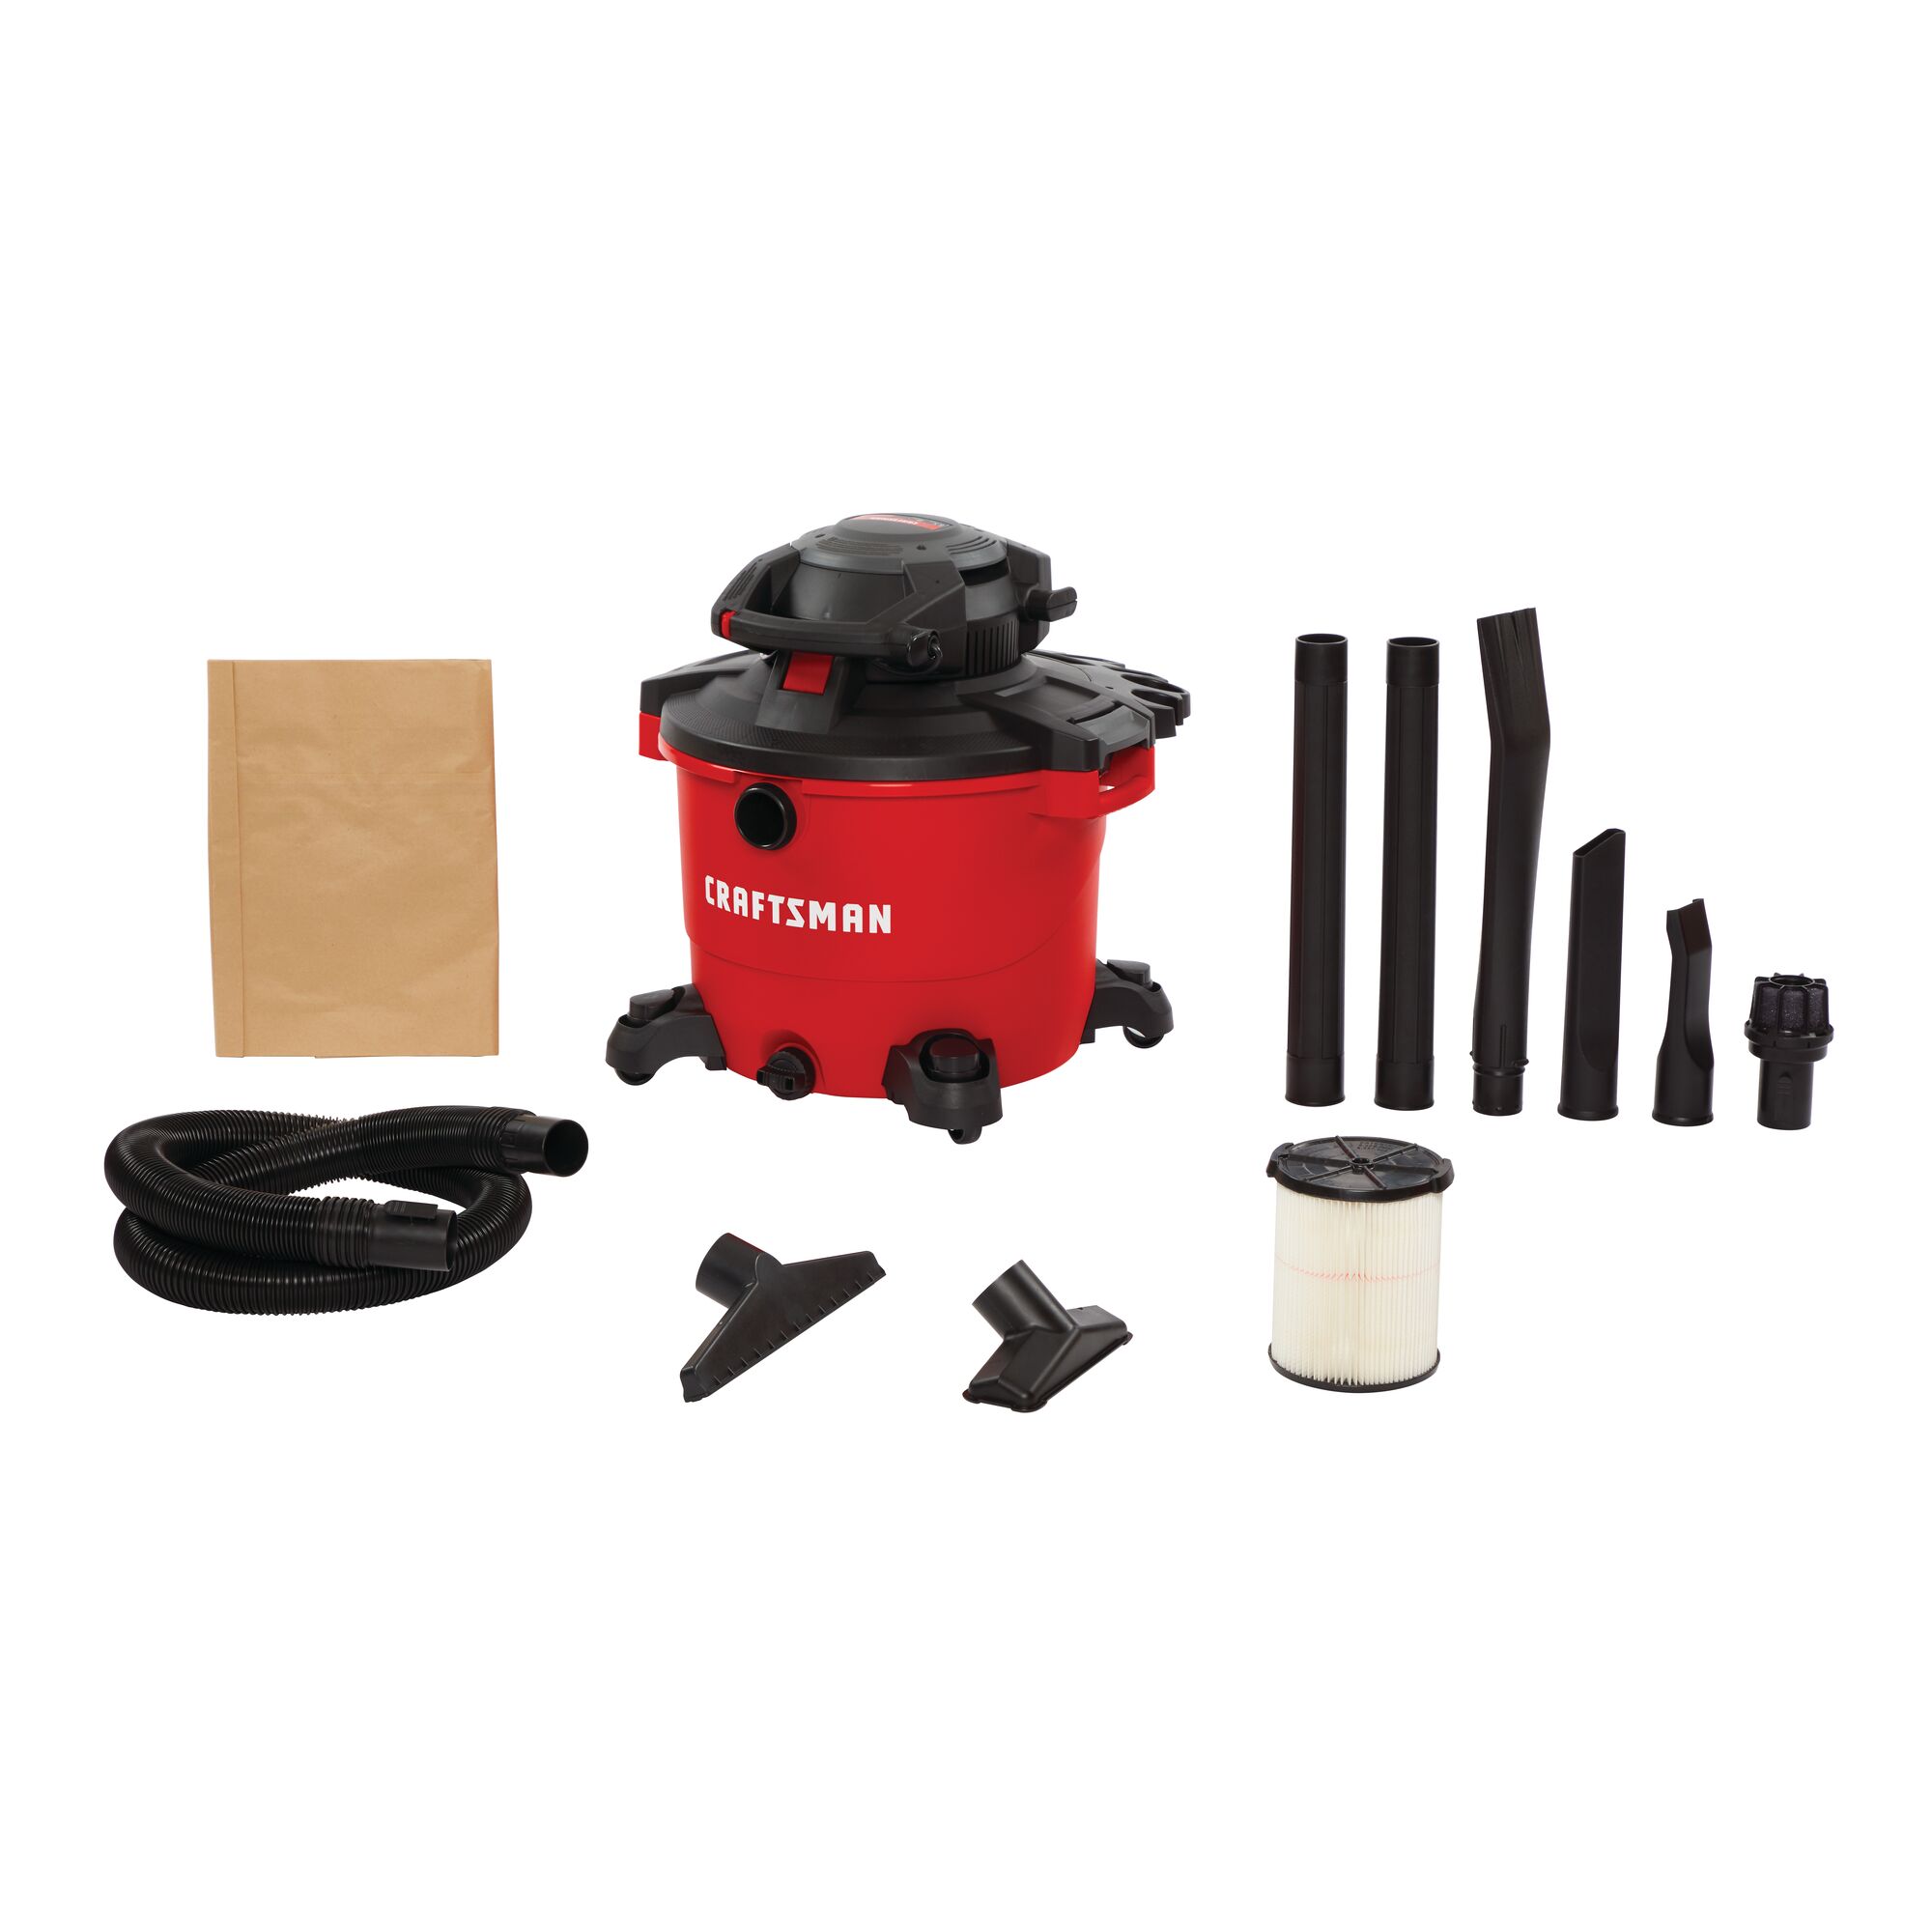 16 gallon 6.5 peak H P wet dry vacuum with detachable leaf blower and complete kit.